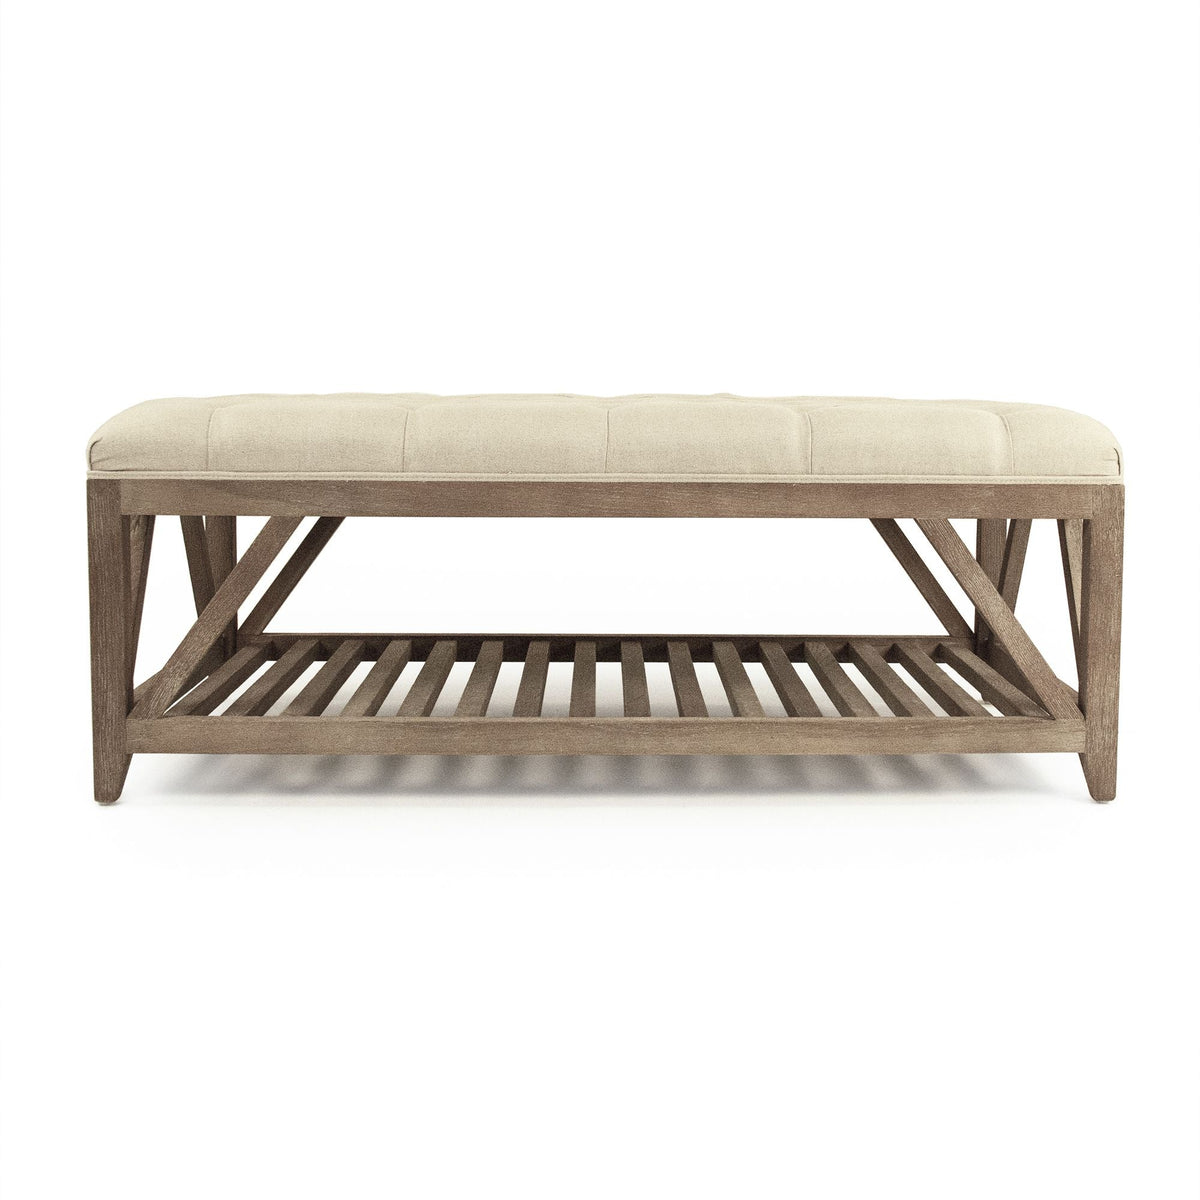 Mathis Tufted Ottoman by Zentique